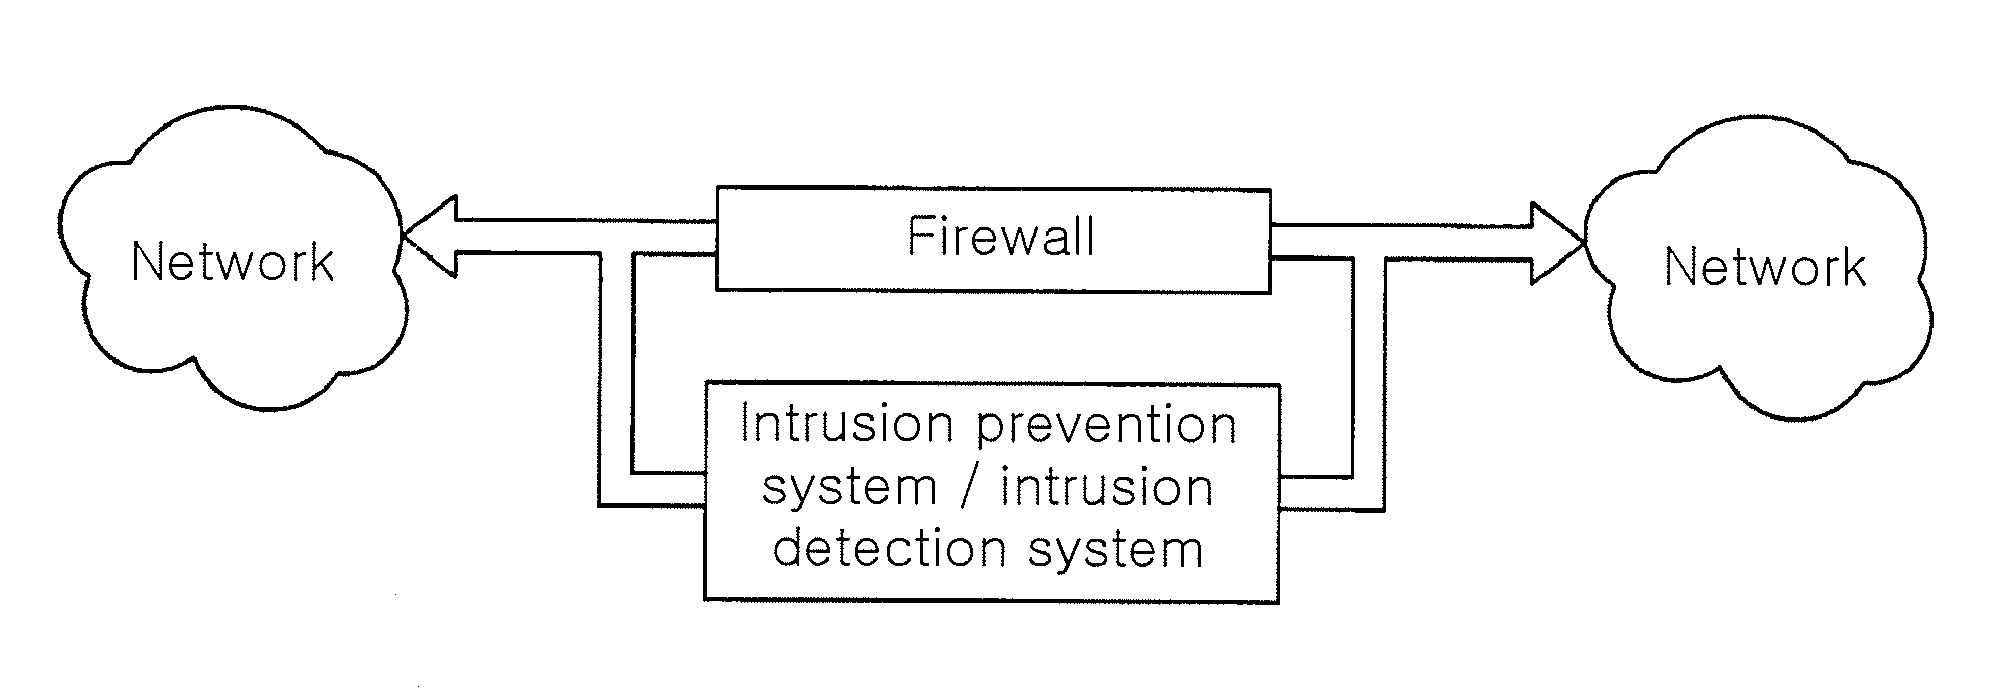 Apparatus and method for extracting signature candidates of attacking packets